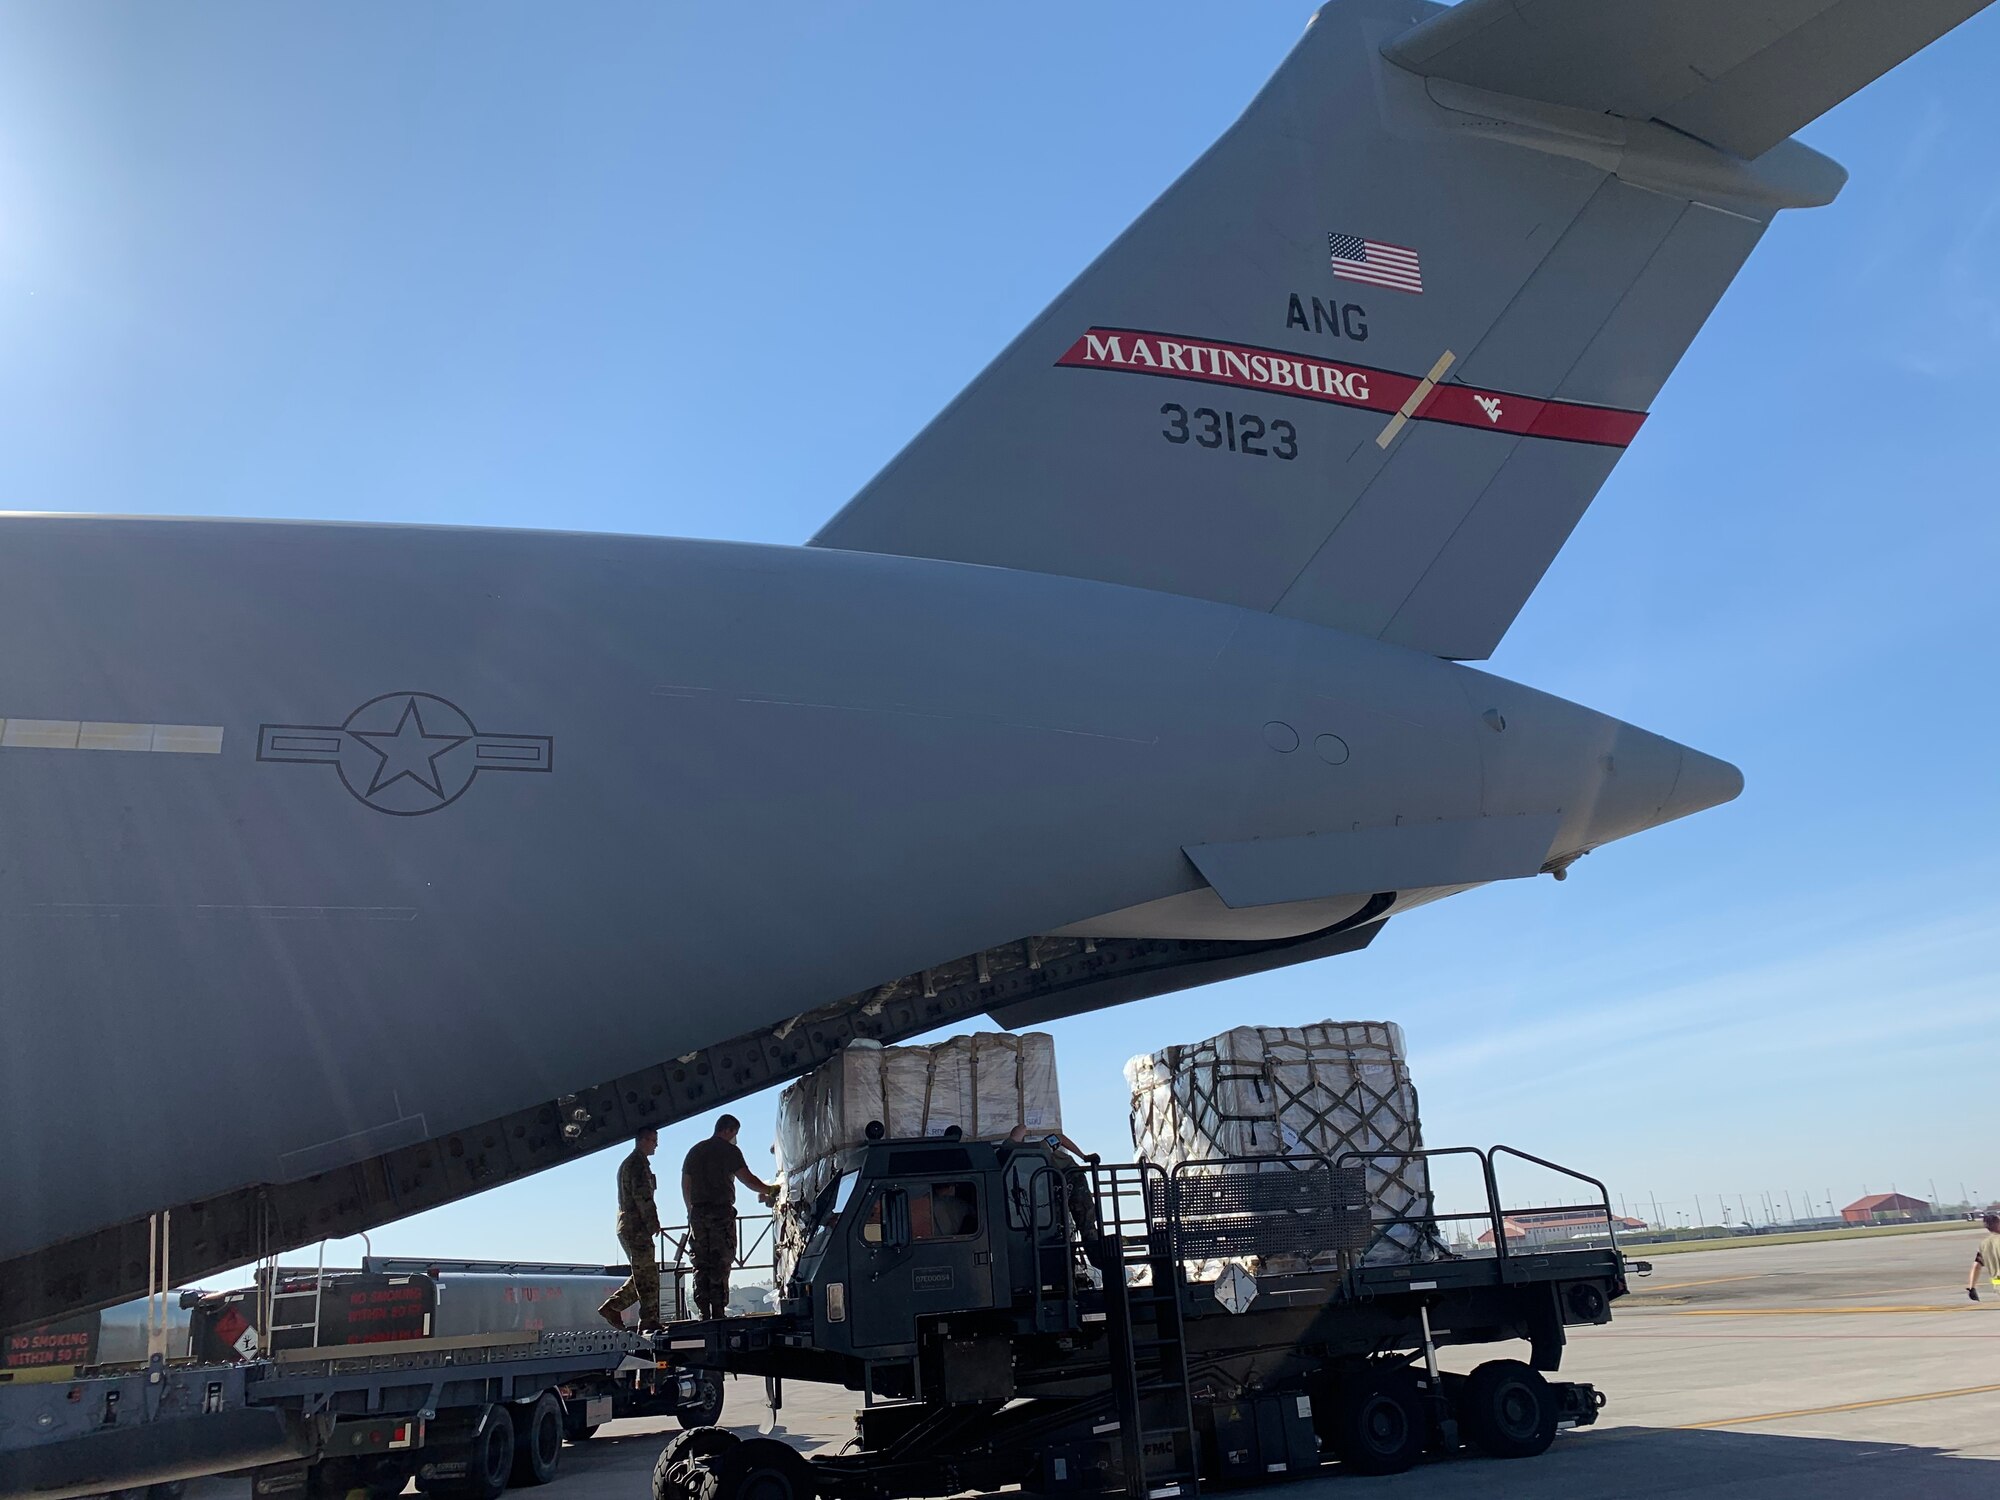 The 167th Airlift Wing transported just over one million COVID-19 test kits from Aviano Air Base, Italy to Memphis, Tenn., April 16, 2020. The test kits, which are maunufactured in Italy, will be distributed throughout the nation from the Fed Ex hub in Tennessee. Eighteen pallets filled the cargo compartment of the C-17 Globemaster III aircraft, crewed by seven 167th AW Airmen.